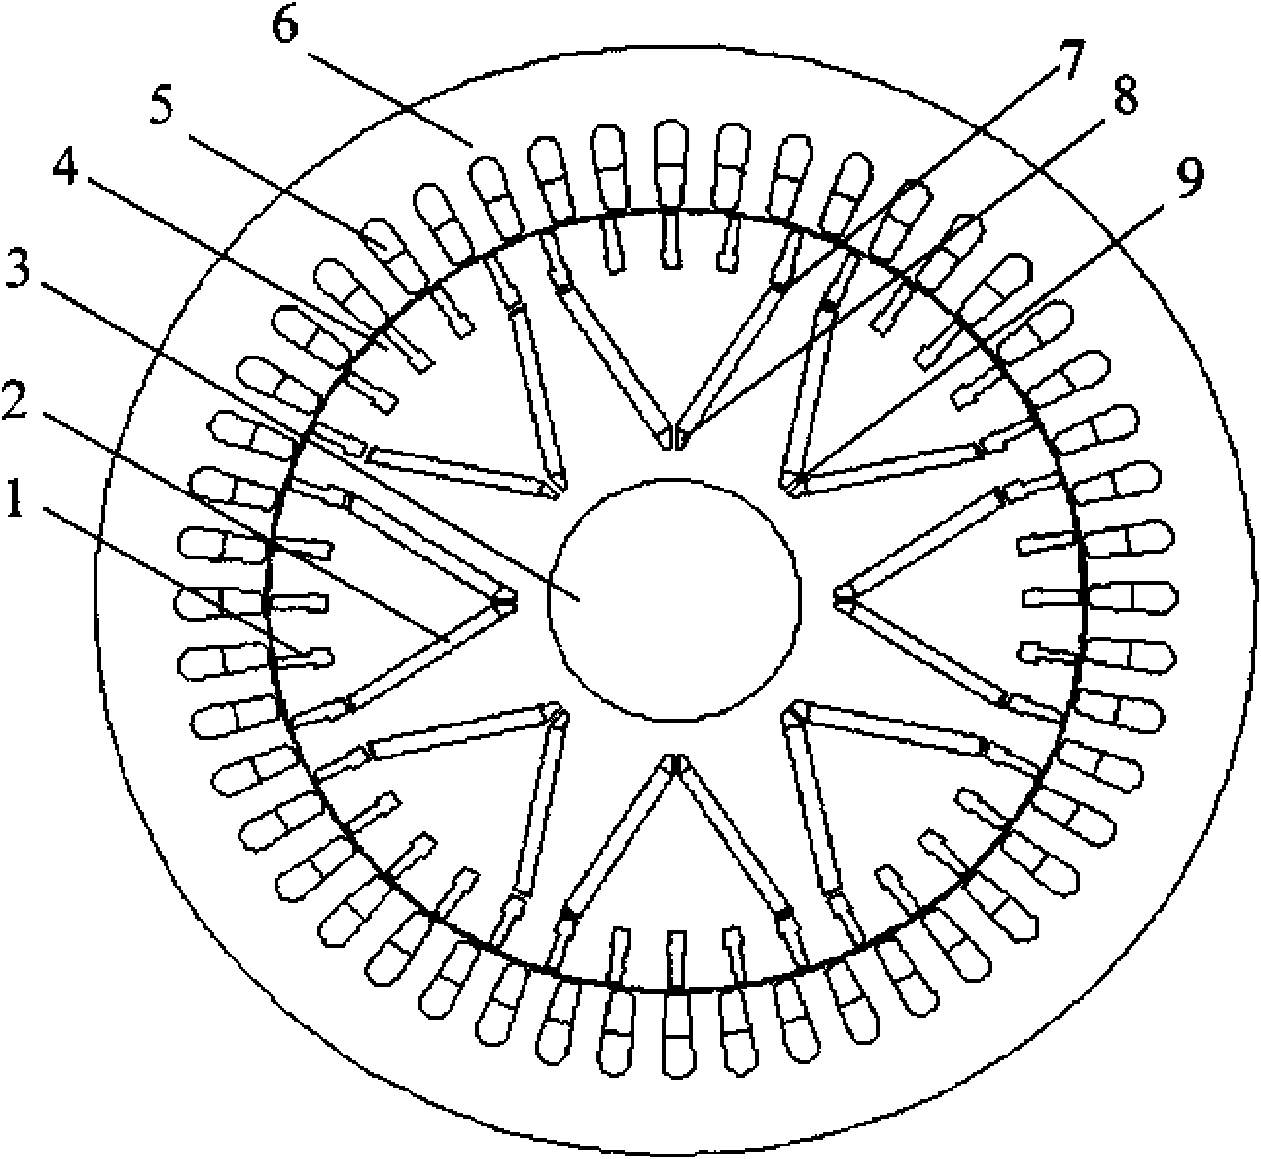 Self-starting permanent magnet motor provided with composite material starting conducting bars